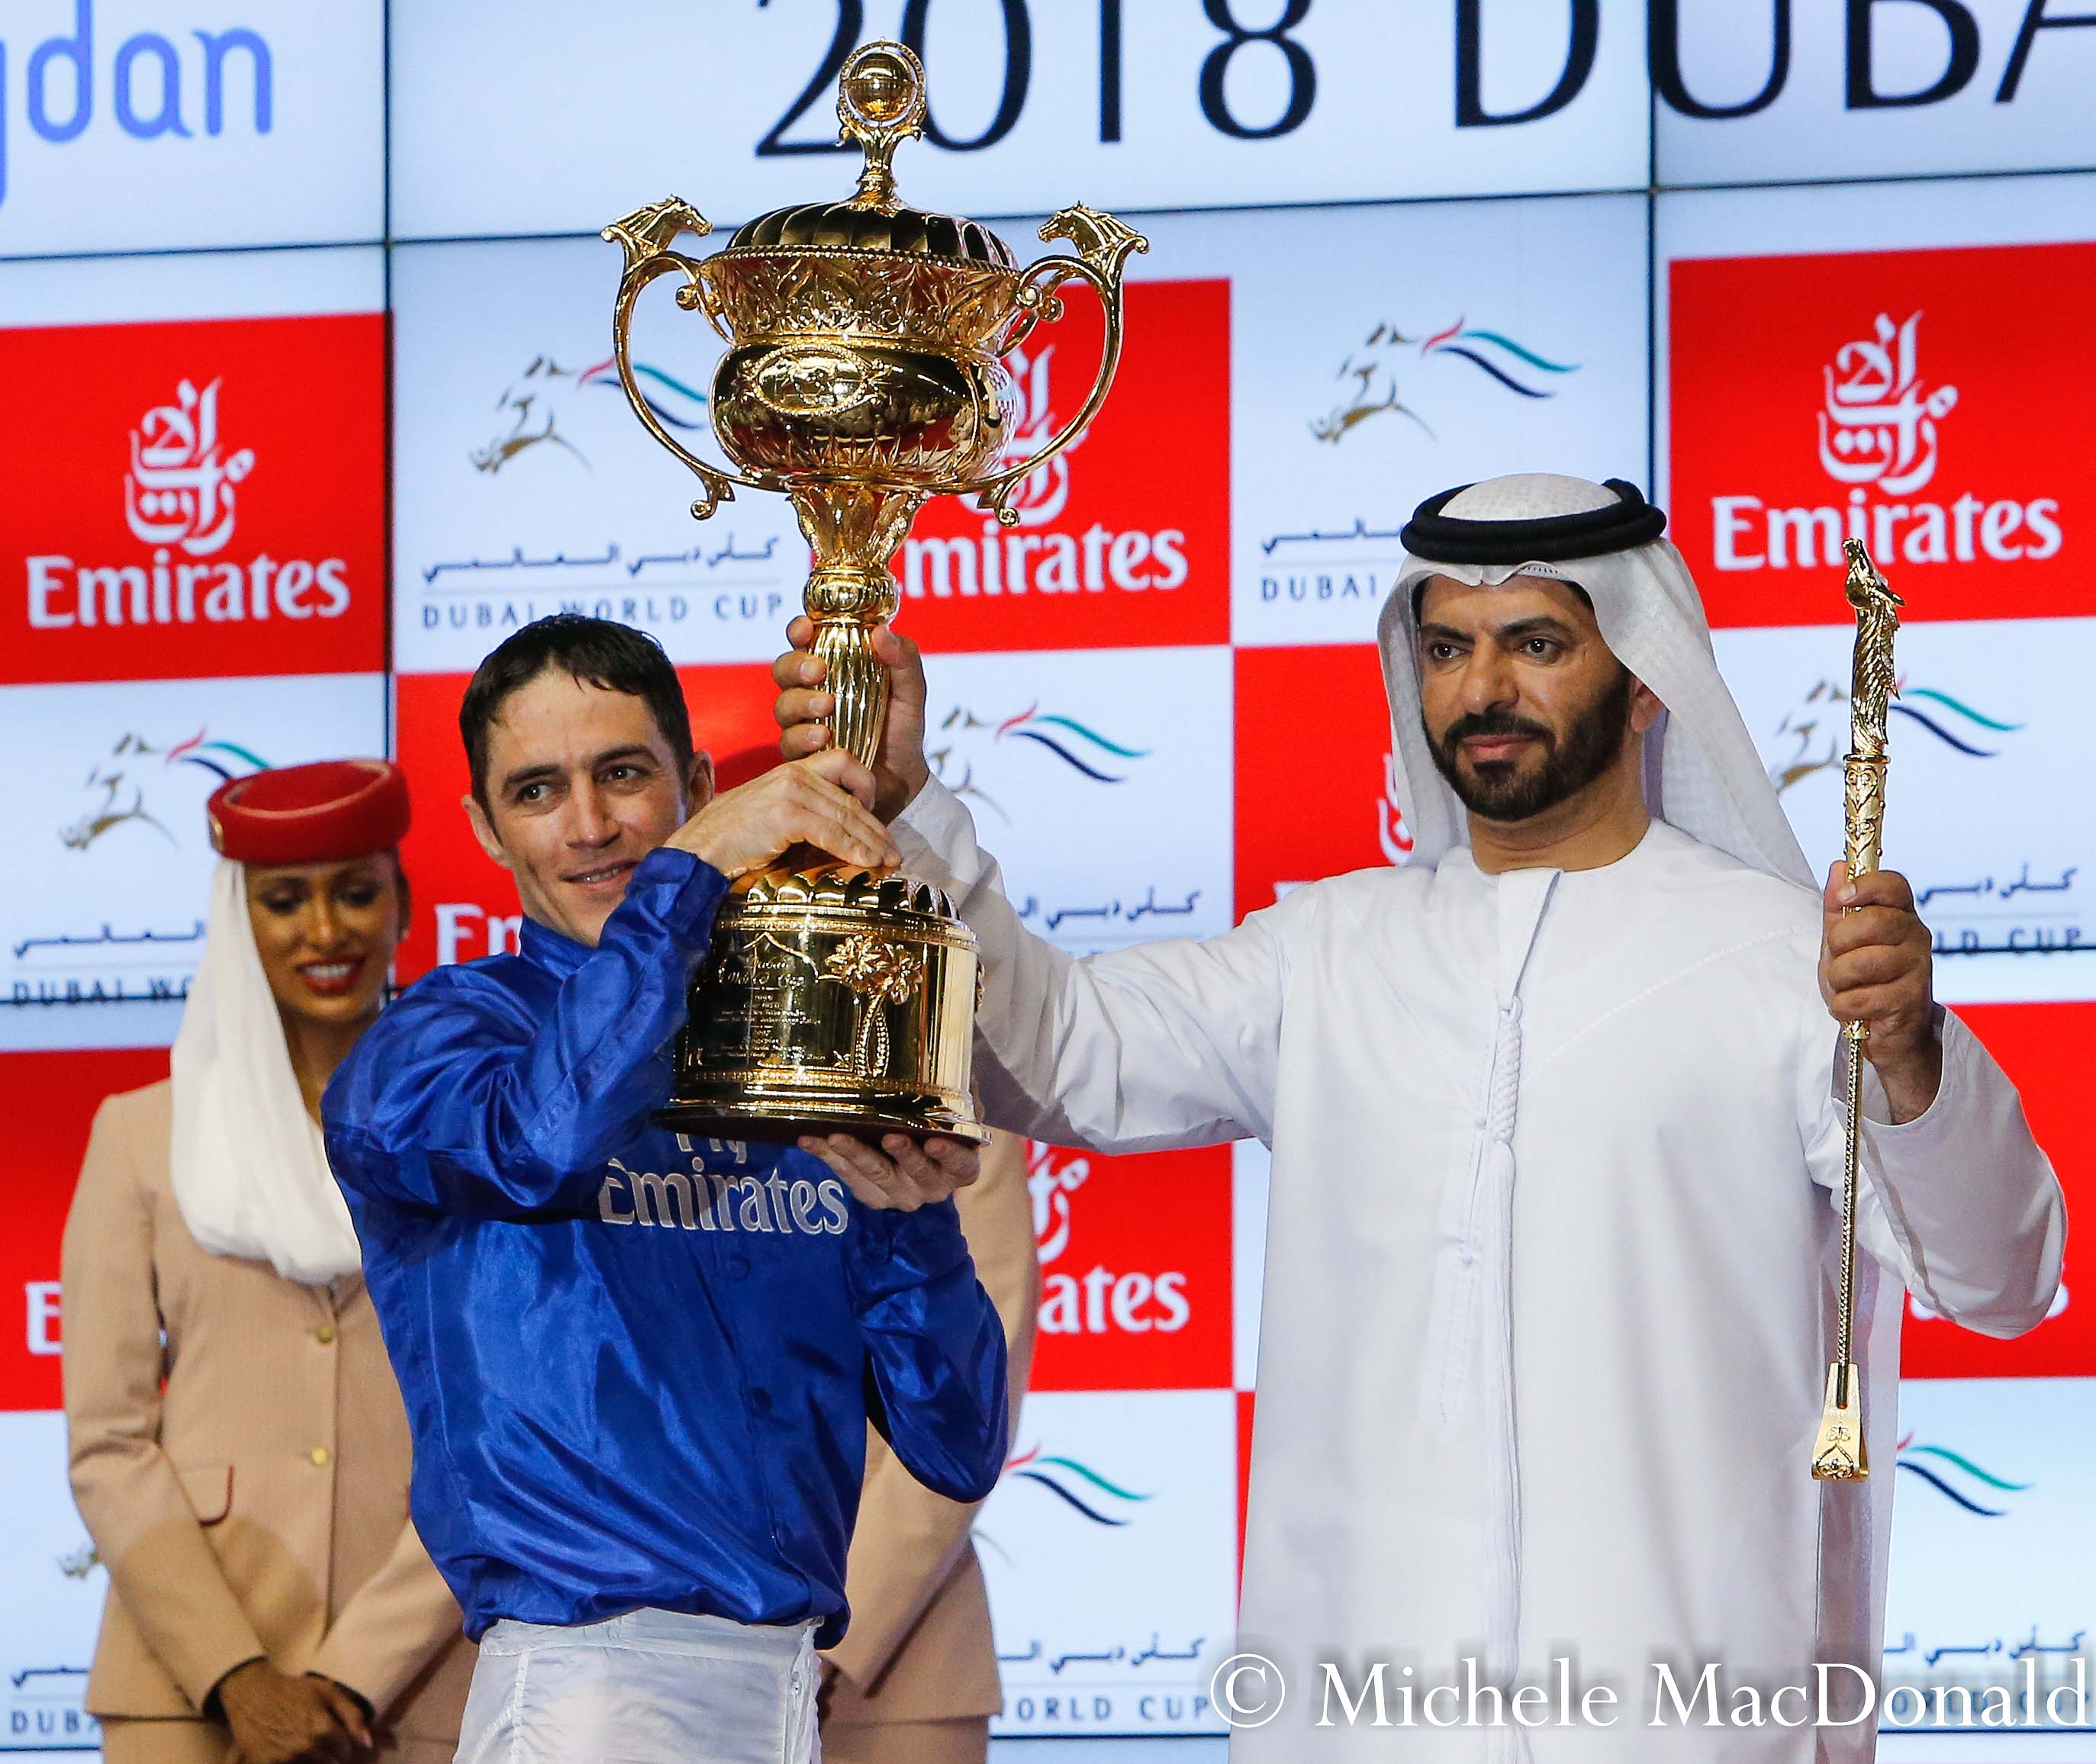 Christophe Soumillon and Saeed Bin Suroor with the Dubai World Cup trophy on Saturday. They will be hoping to get their hands on another prestigious trophy at Churchill Downs in November. Photo: Michele MacDonald